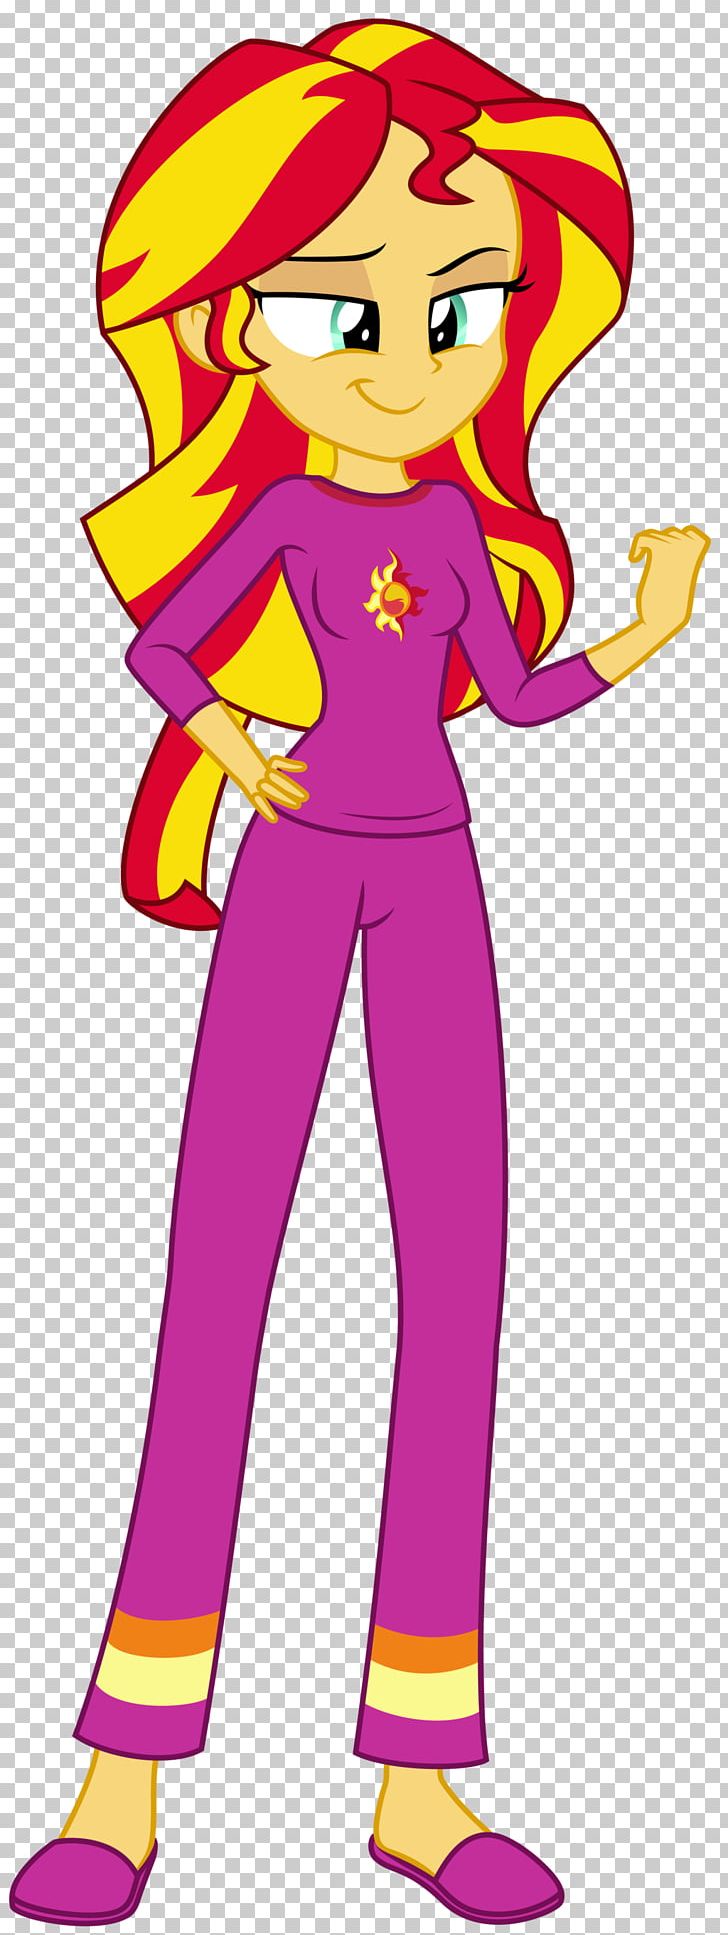 Sunset Shimmer Twilight Sparkle Pinkie Pie Applejack Rainbow Dash PNG, Clipart, Cartoon, Deviantart, Equestria, Fictional Character, Girl Free PNG Download